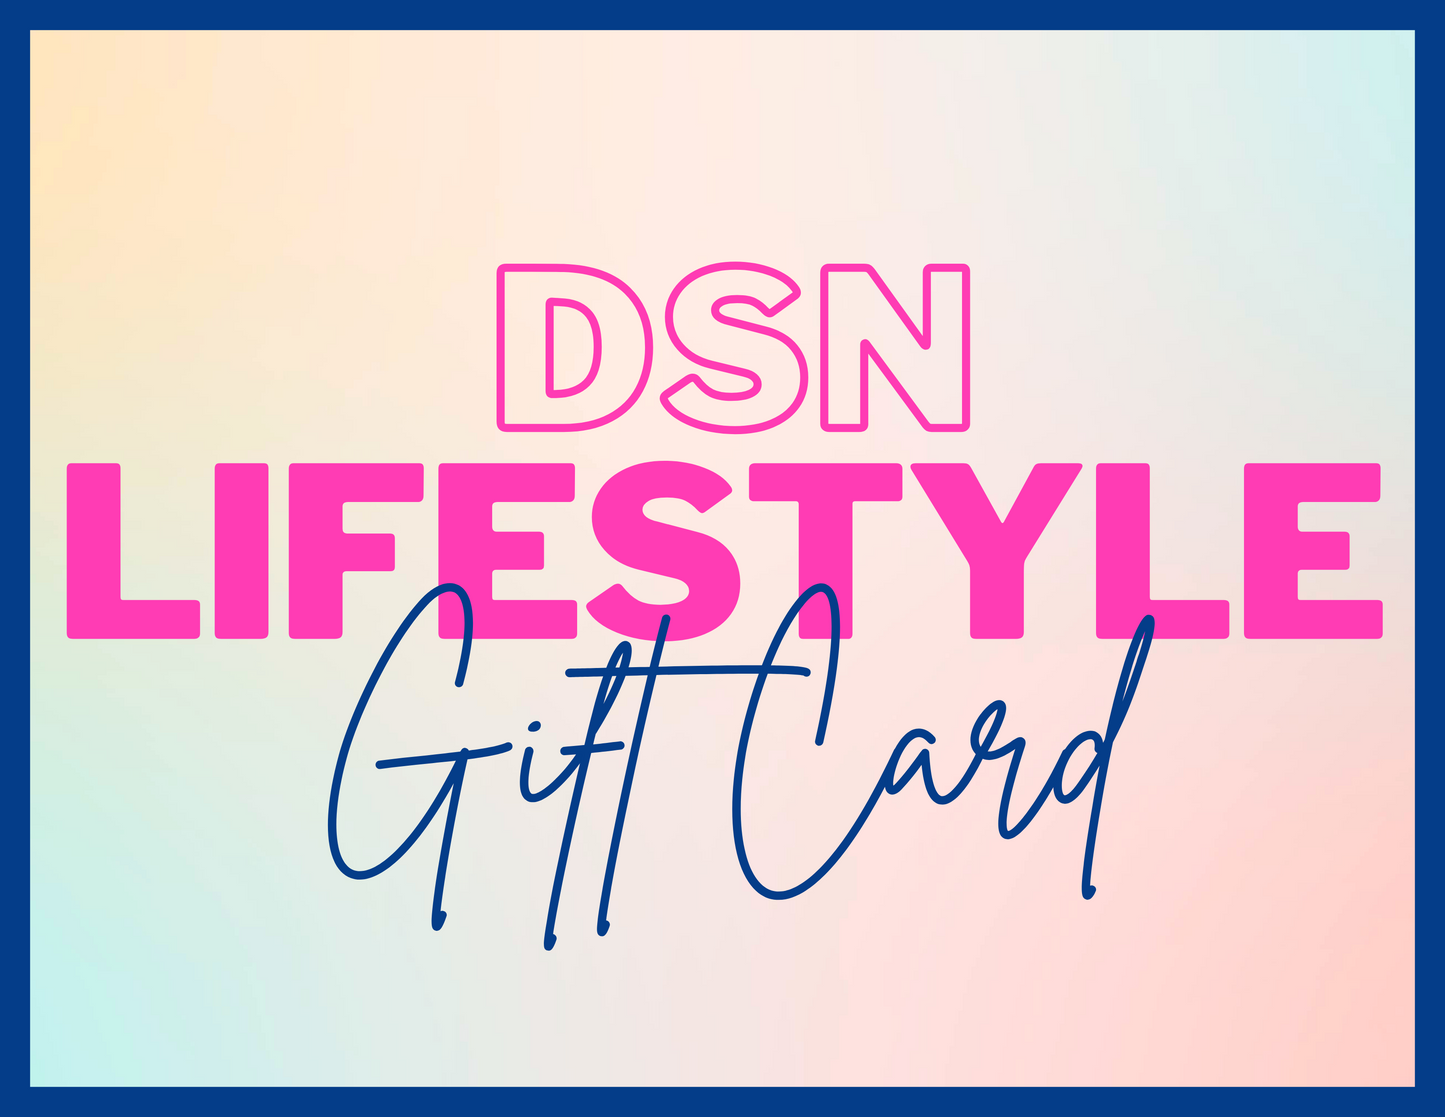 The DSN Lifestyle Gift Card